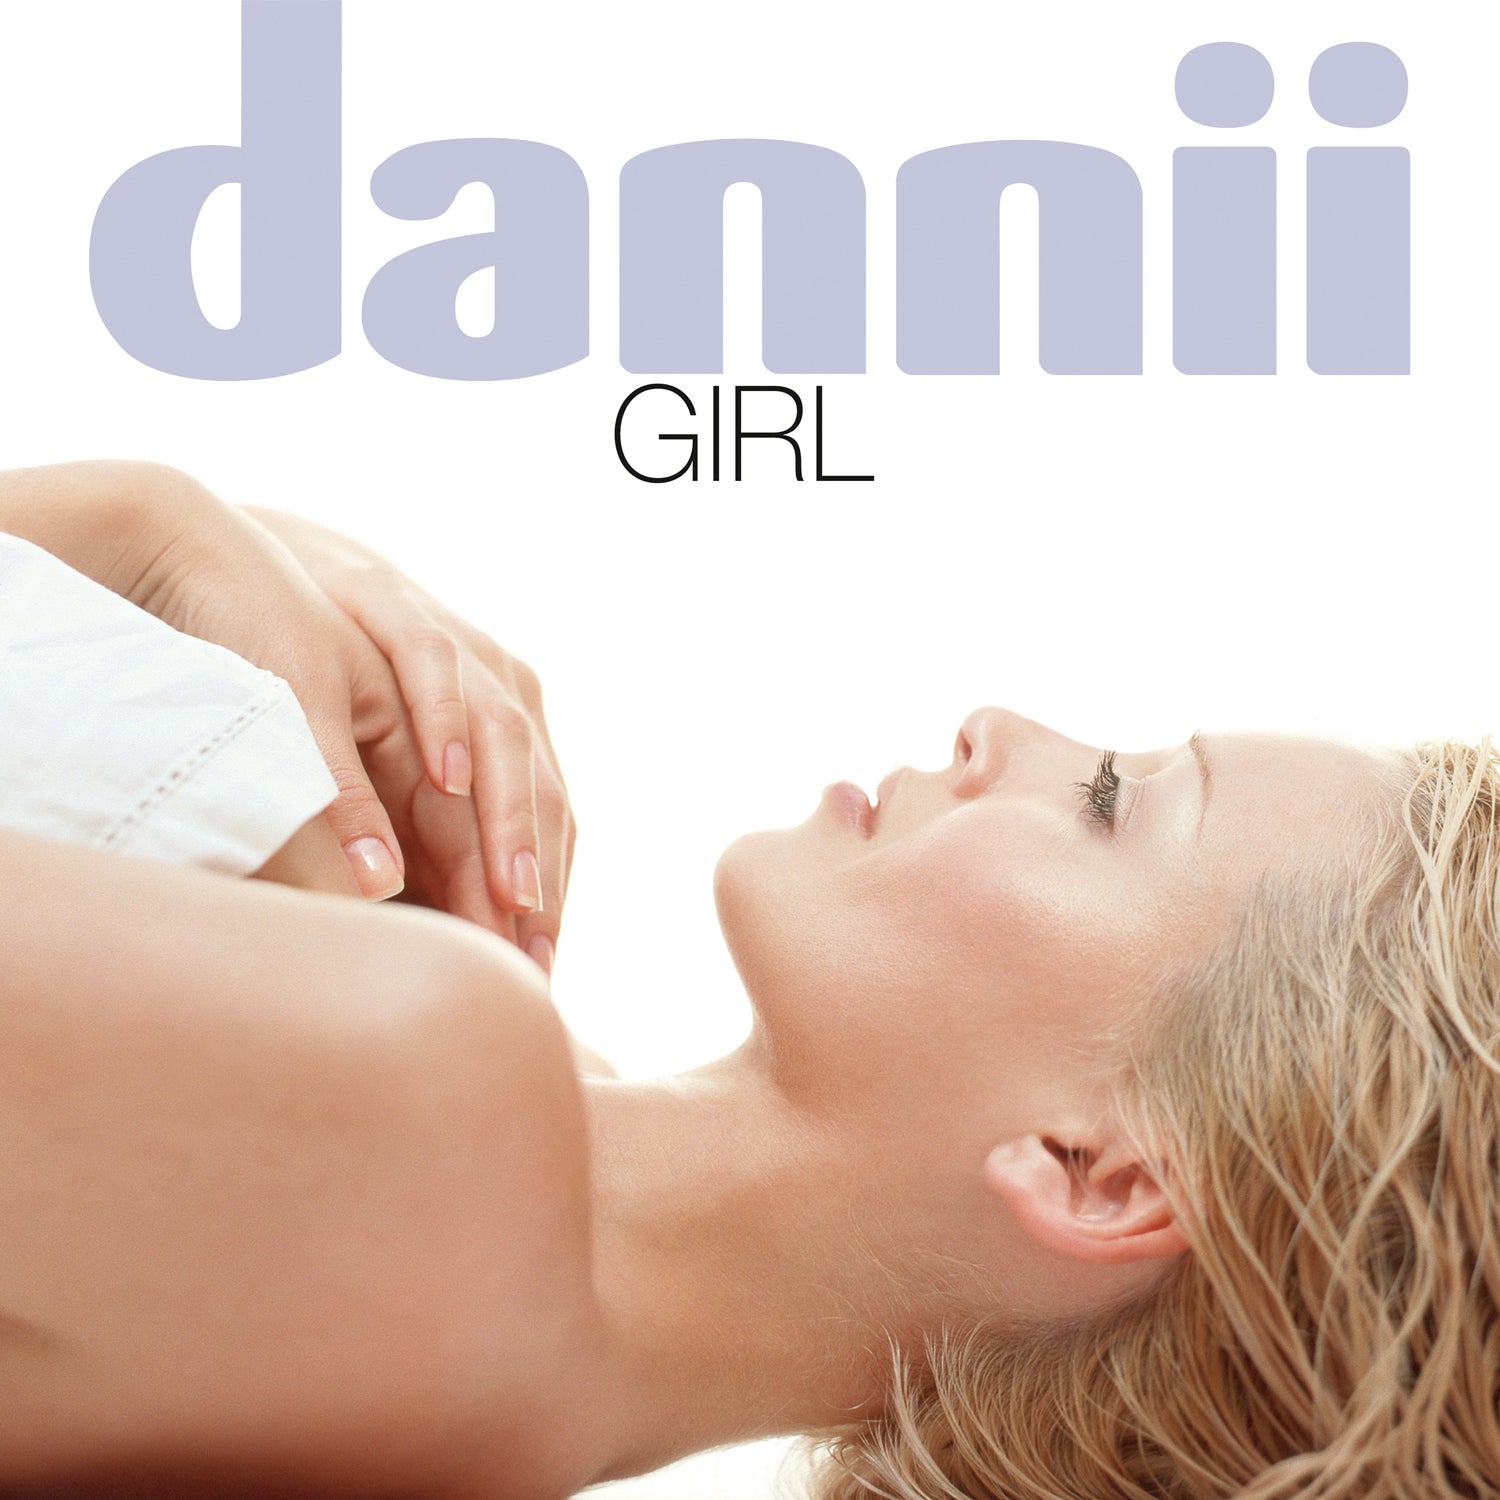 DANNII MINOGUE - Girl (25th Anniversary Collector's Edition) (NAD 2023) - 4CD Clamshell Box